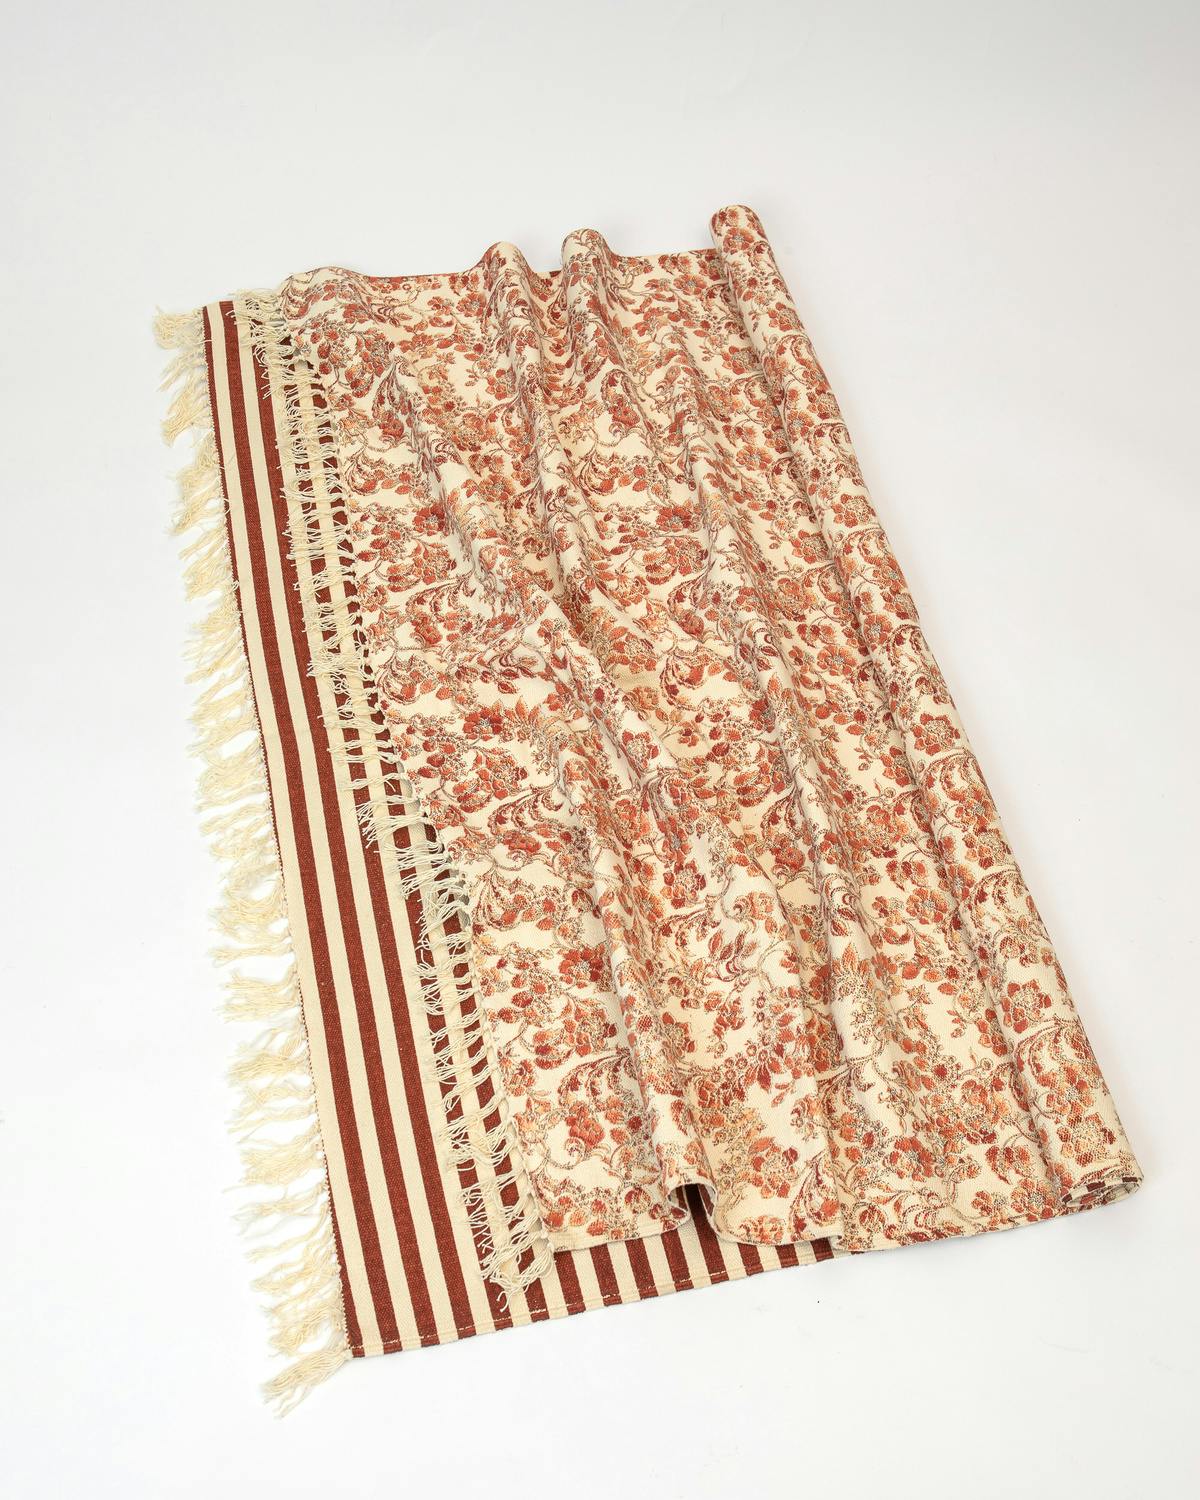 Big Rug (In store exclusive), Delicate. Image #2